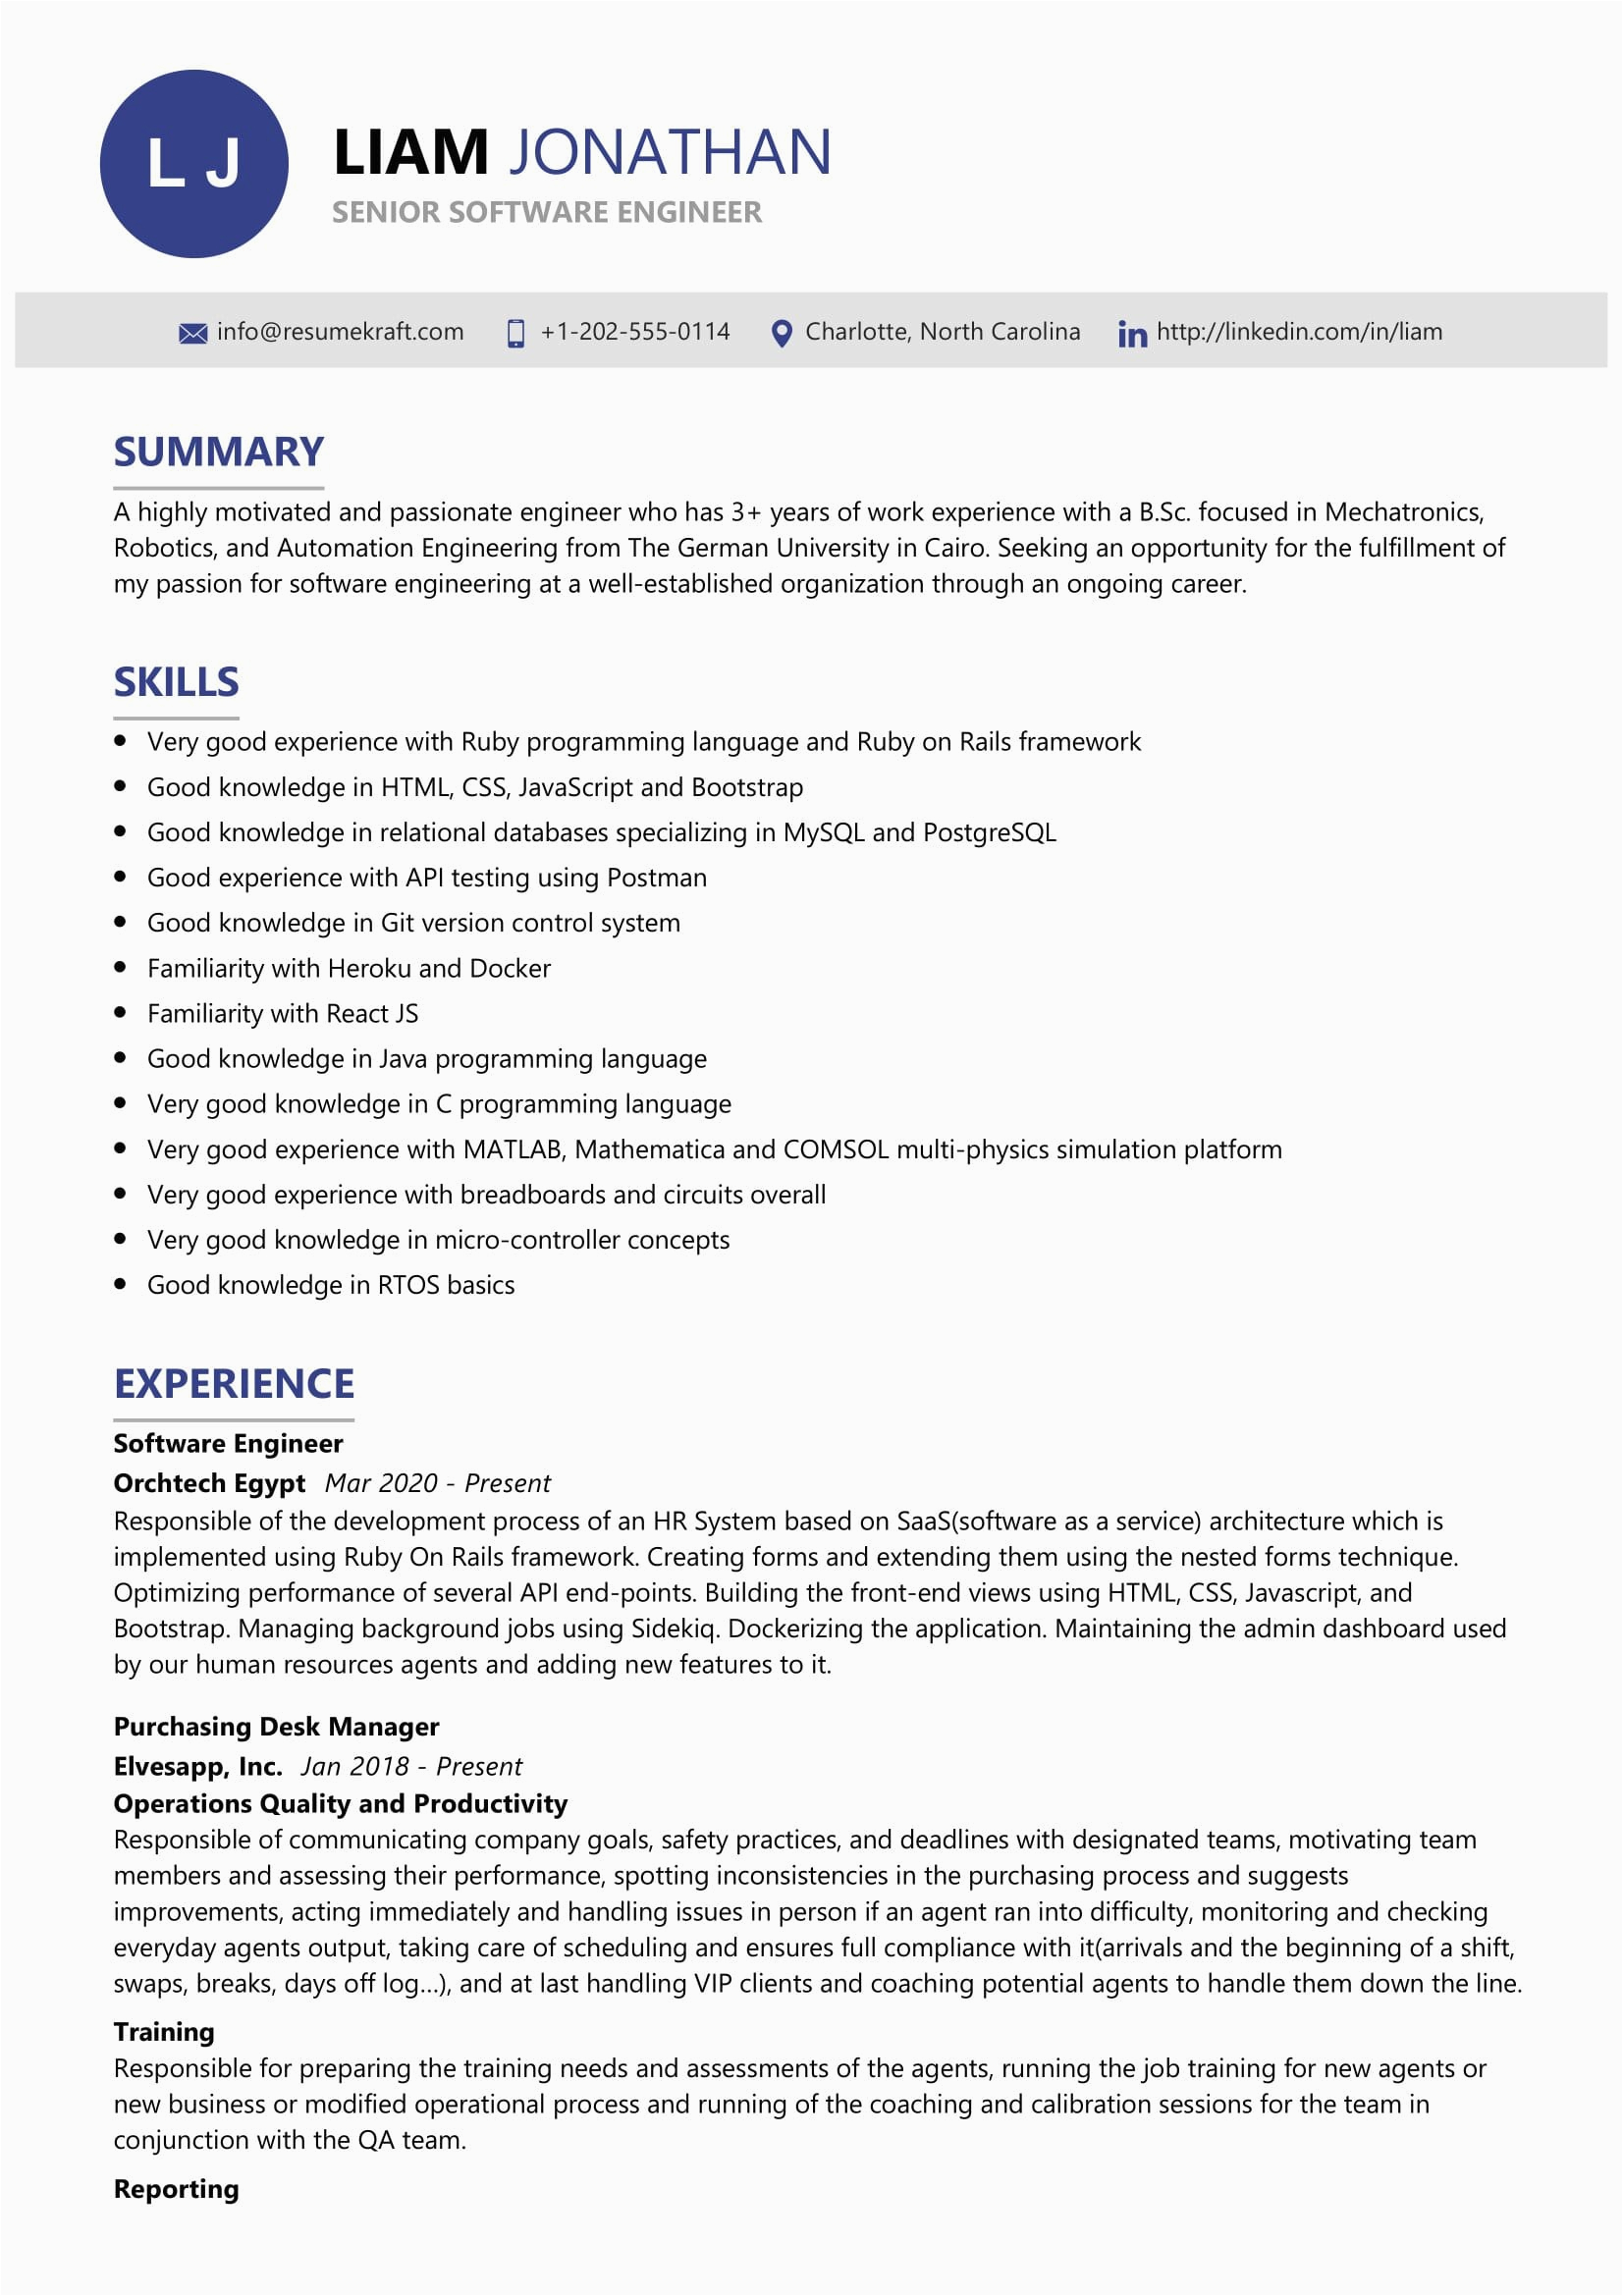 Professional Resume Samples for software Engineers Senior software Engineer Resume Sample Resumekraft